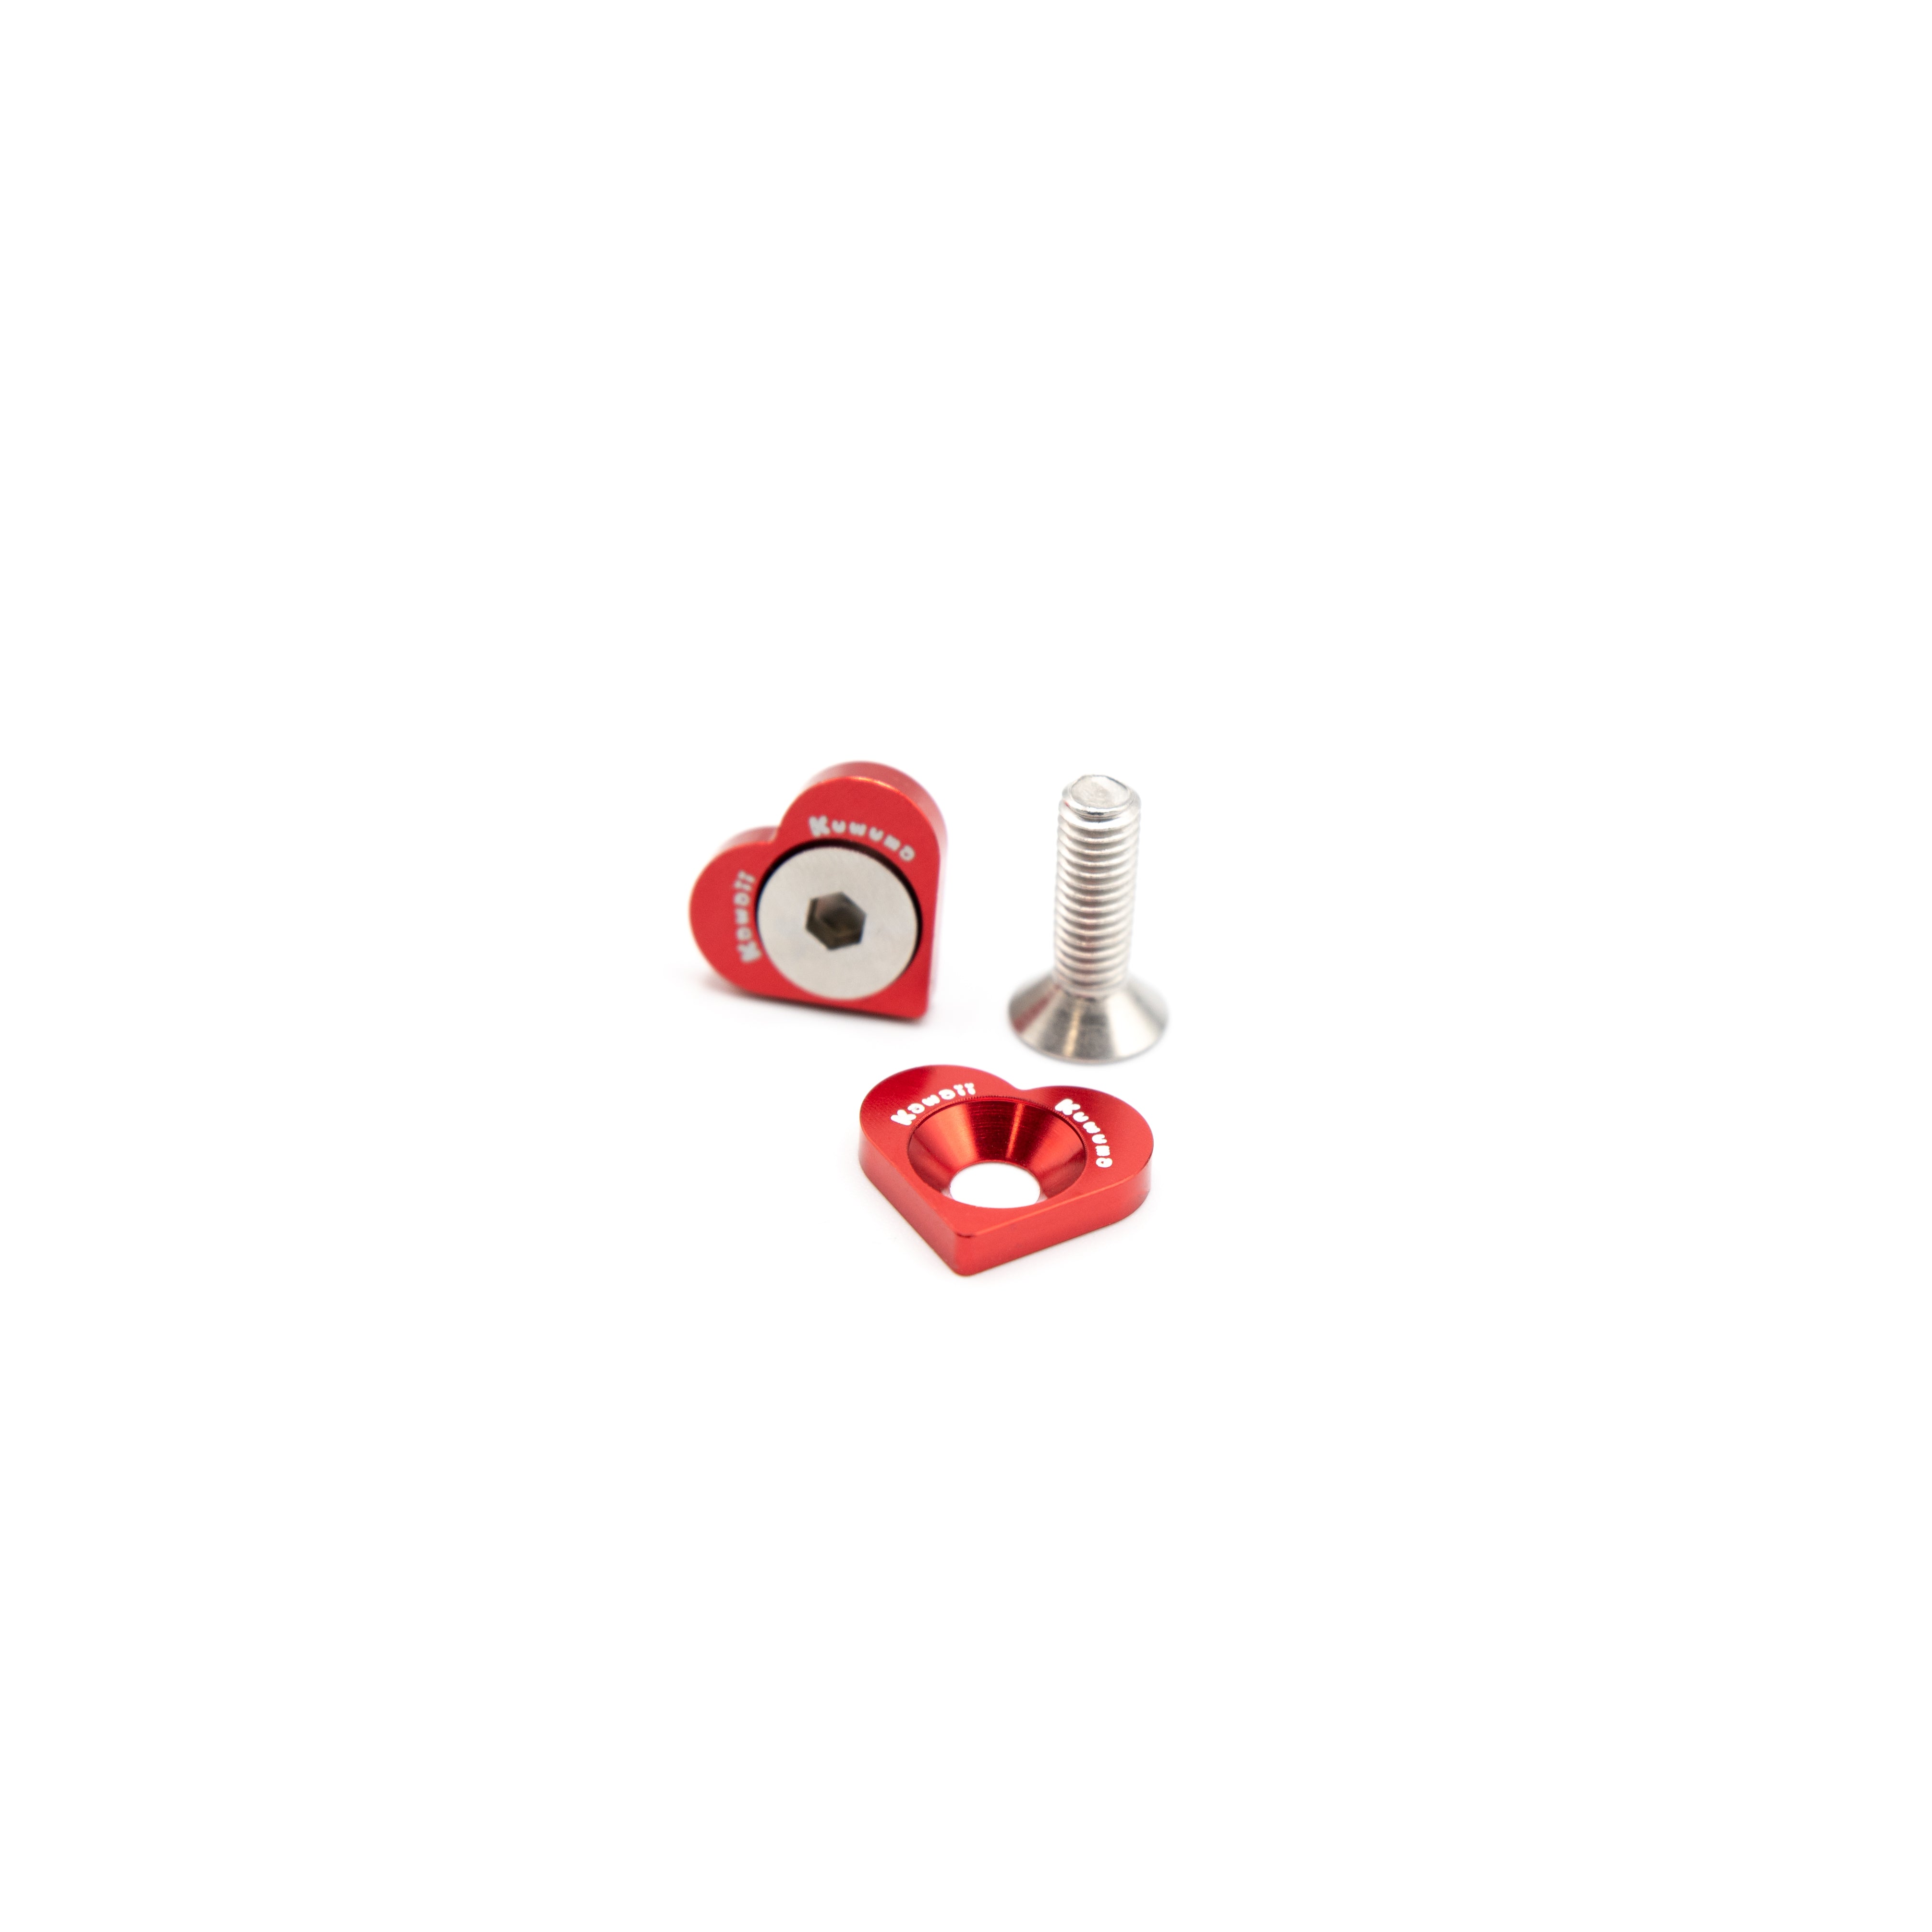 Heart shaped Washer with m6 bolt